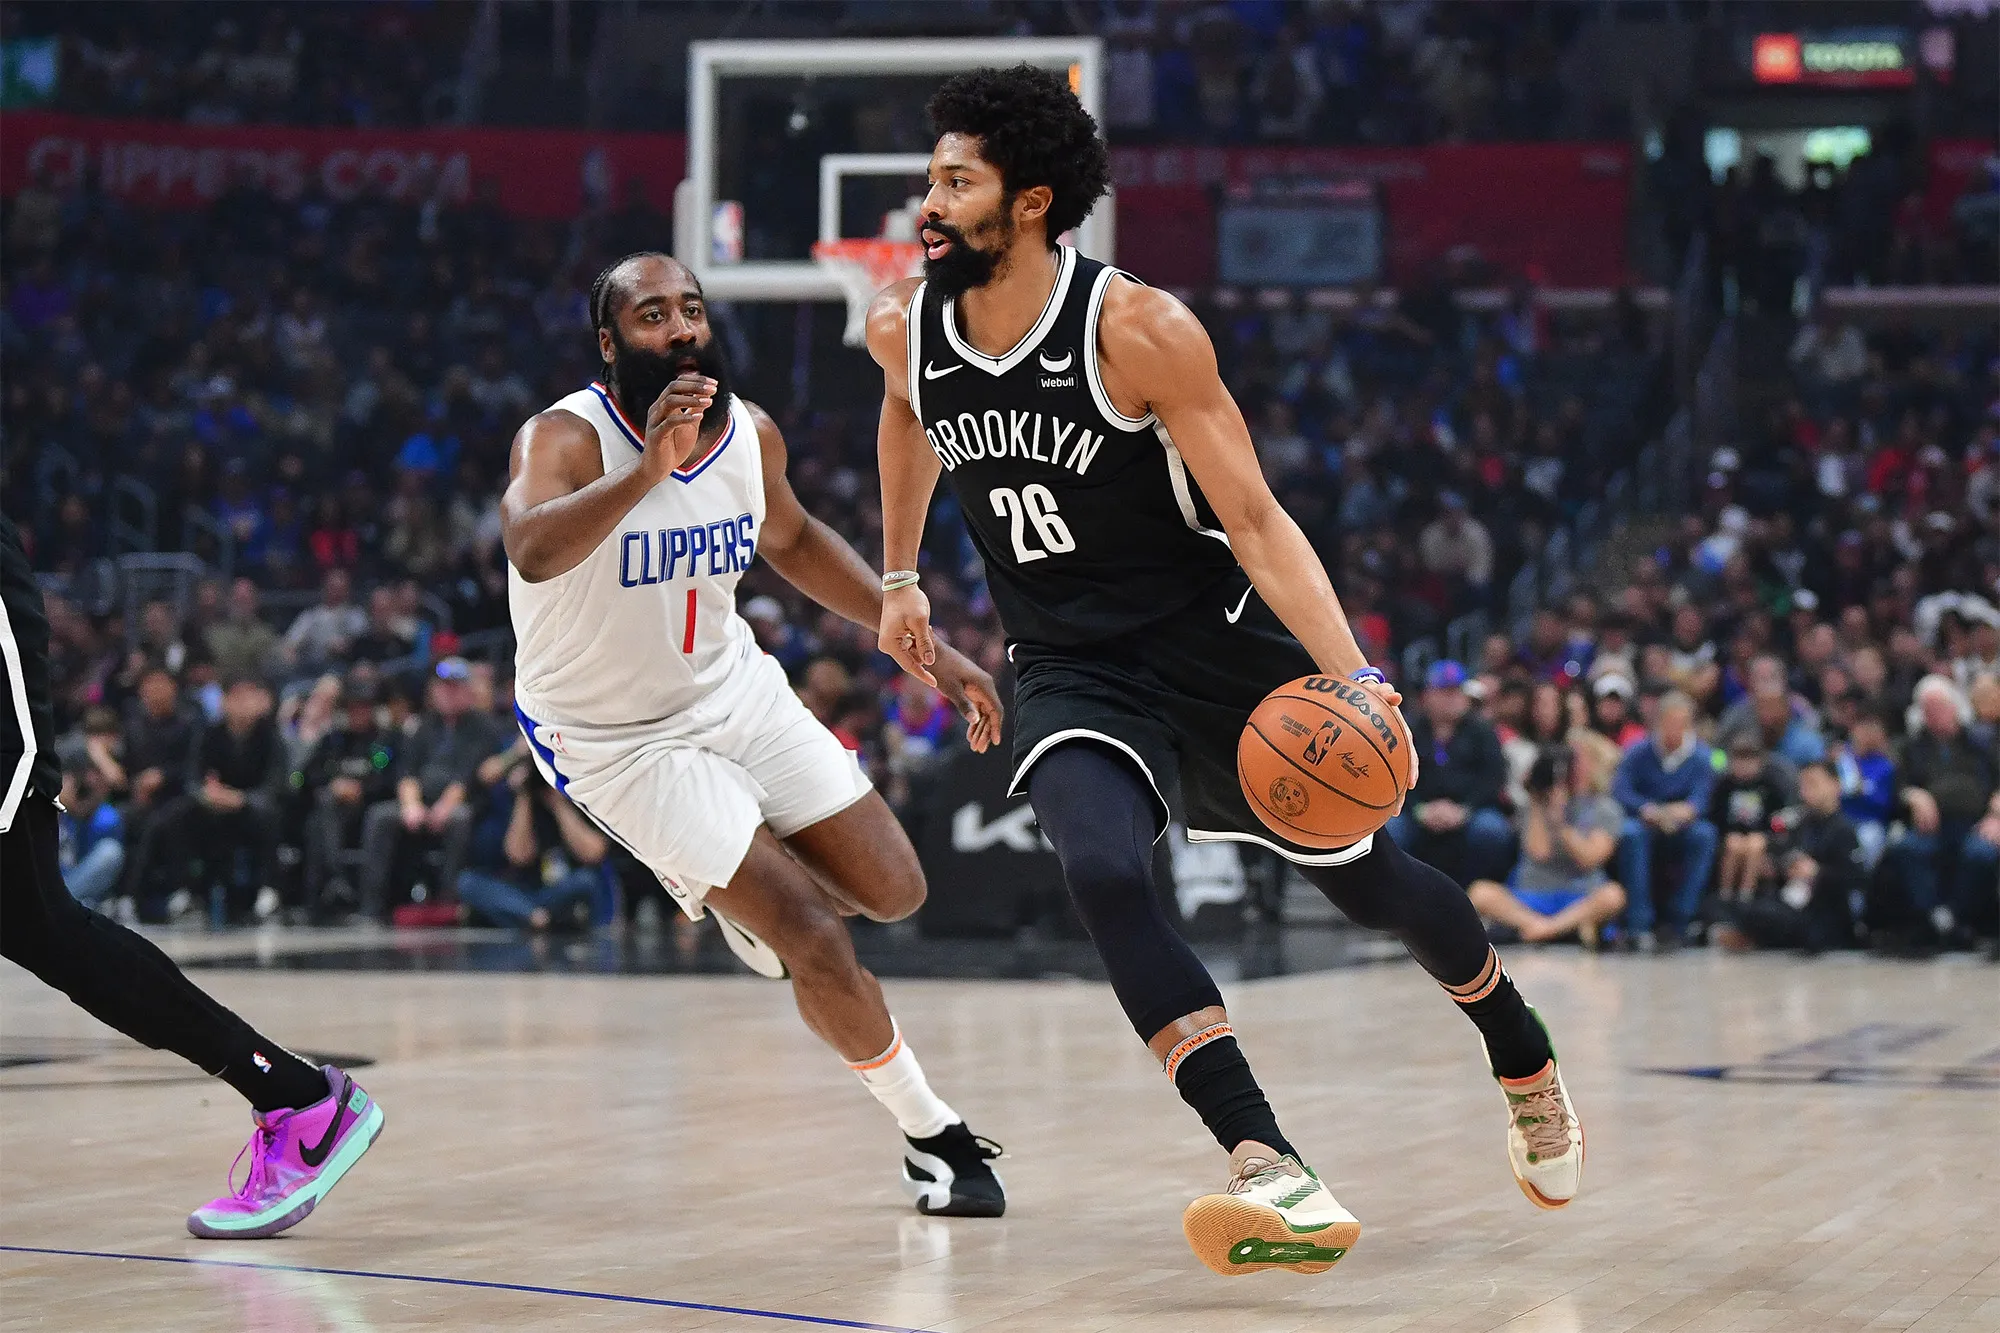 Insider Buzz Lakers Eyeing Spencer Dinwiddie Trade - A Smart Move or a Costly Gamble